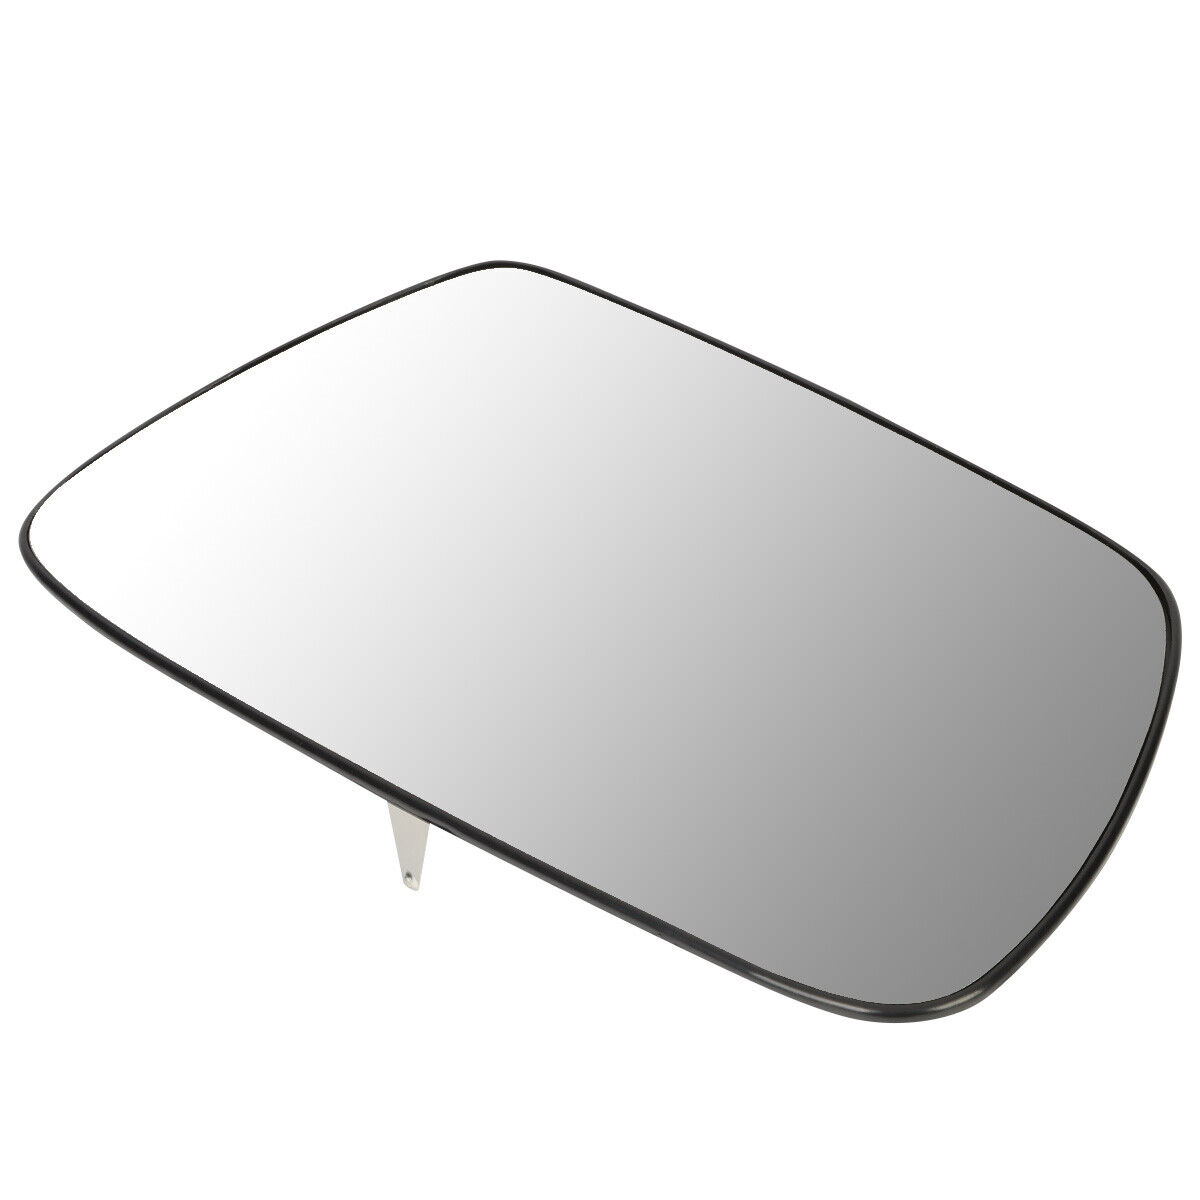 5142874AA OE Style Passenger/Right Side Mirror Glass Lens w/Heated Replacement for Jeep Grand Cherokee 05-10 